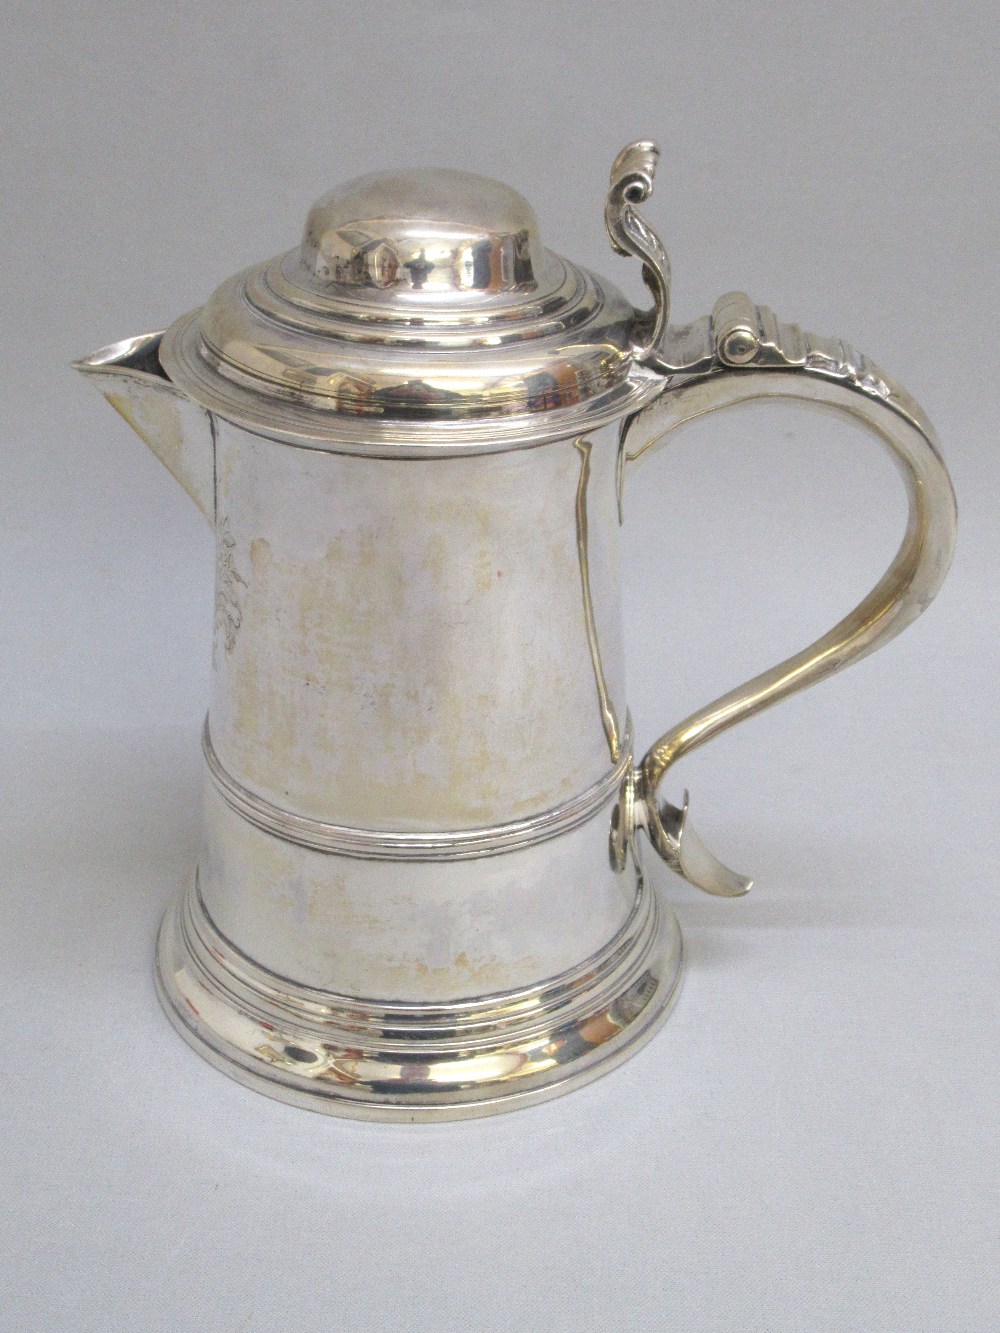 GEORGE III SILVER TANKARD 1764, WITH LATER SPOUT, RE-ASSAYED BY THE LONDON ASSAY OFFICE STAMPED 925. - Image 7 of 8